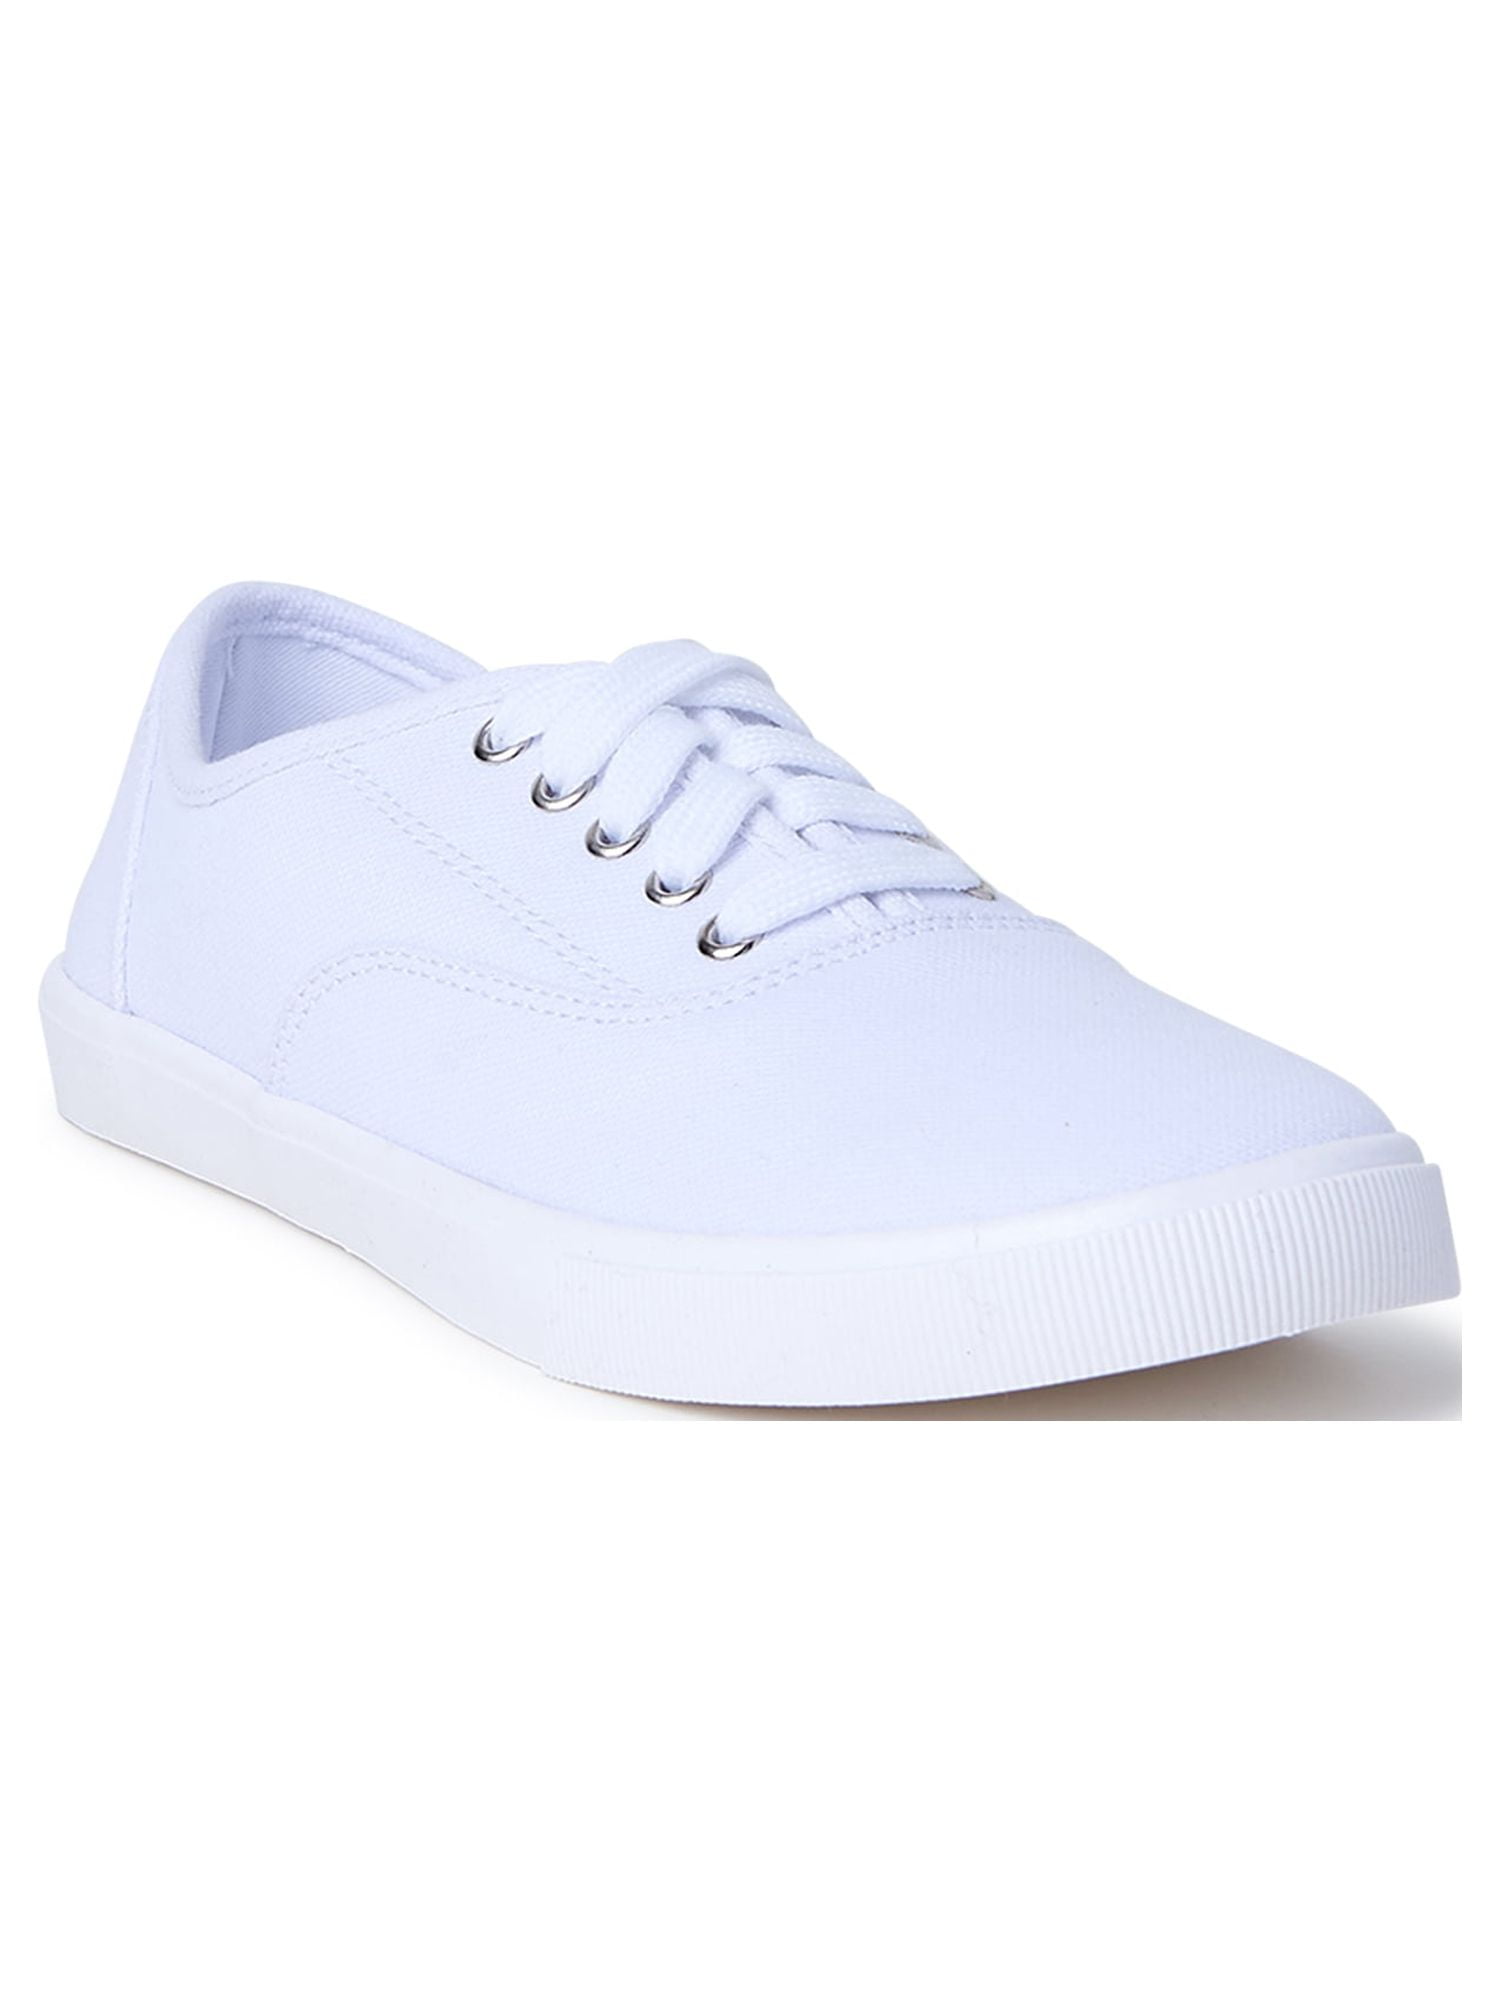 Common Projects Achilles lace-up Sneakers - Farfetch